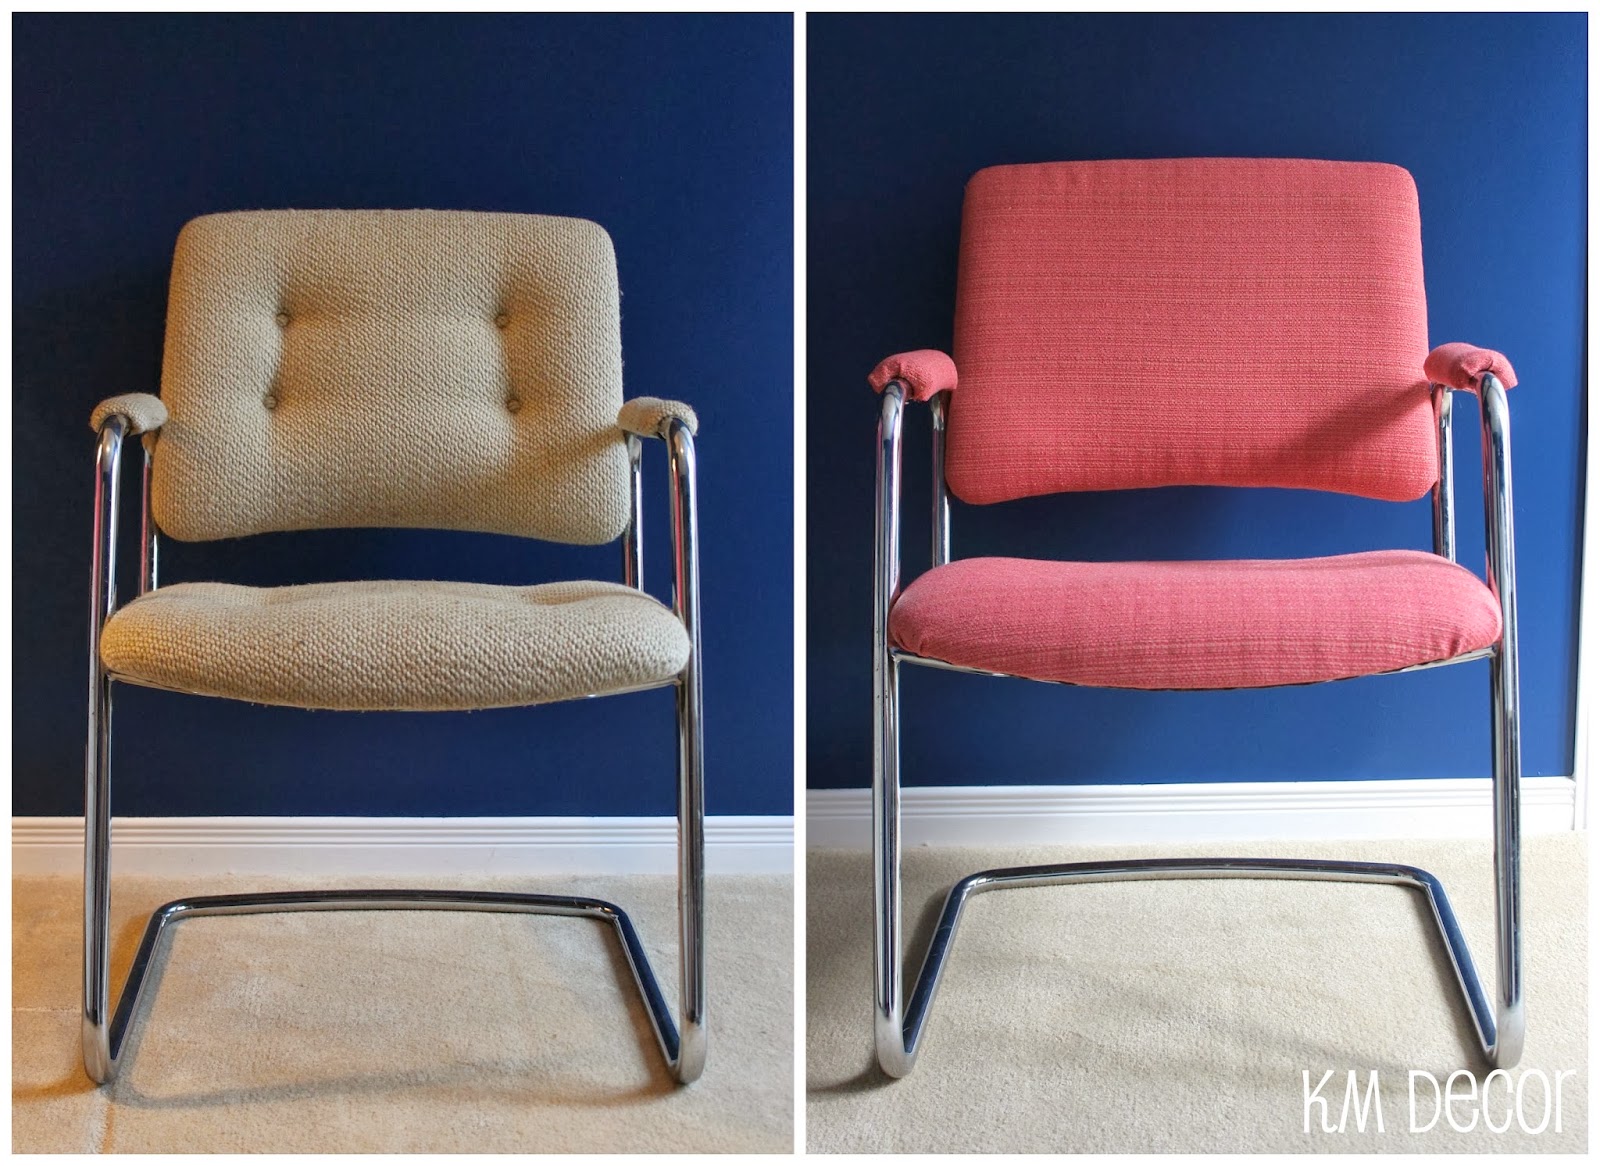 KM Decor: DIY: Office Chair Makeover